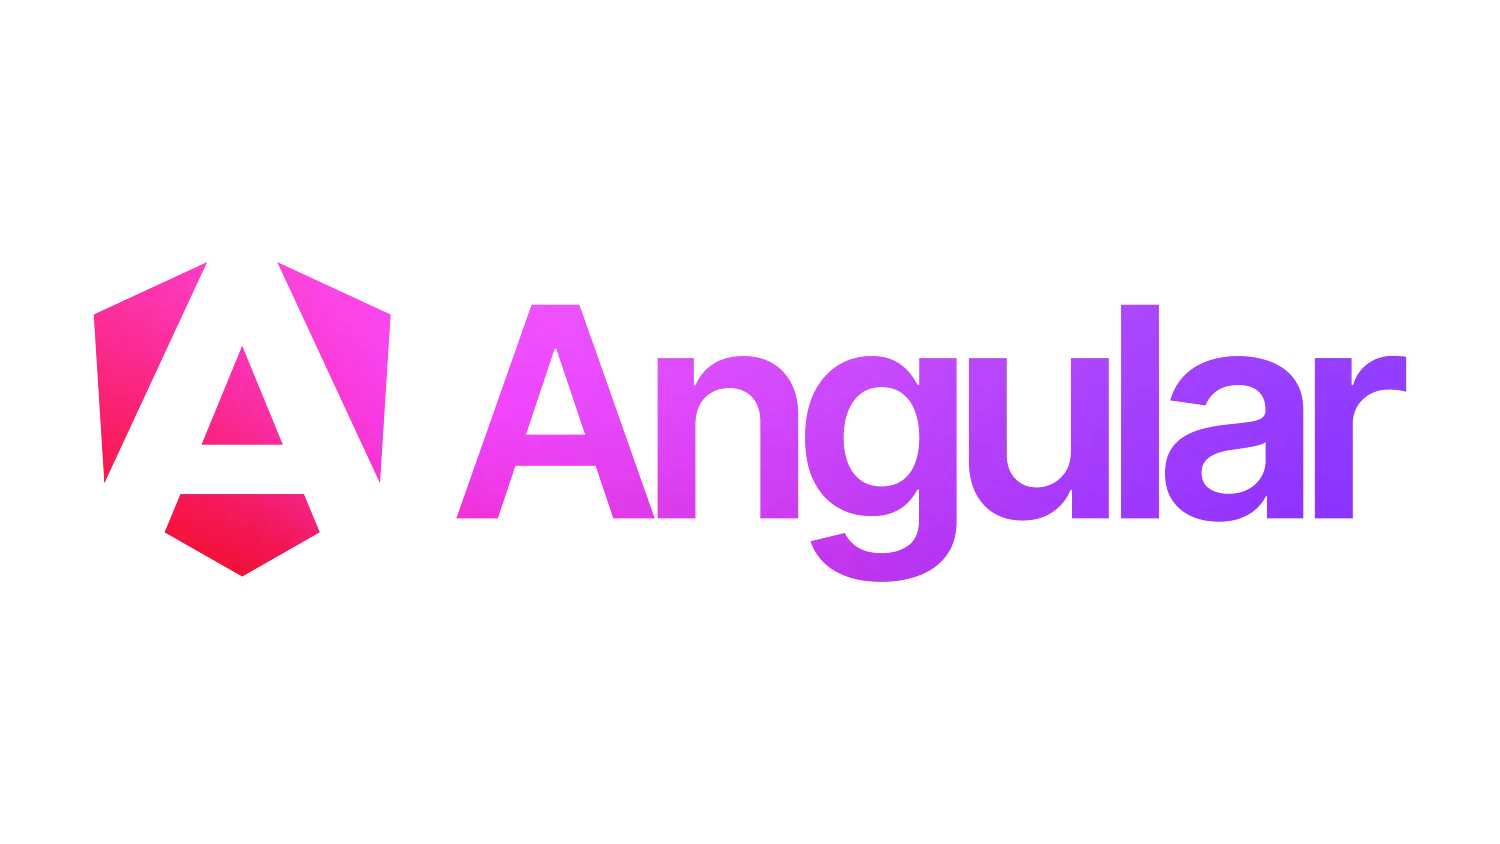 Deferrable Views, skeletons and named chunks in Angular